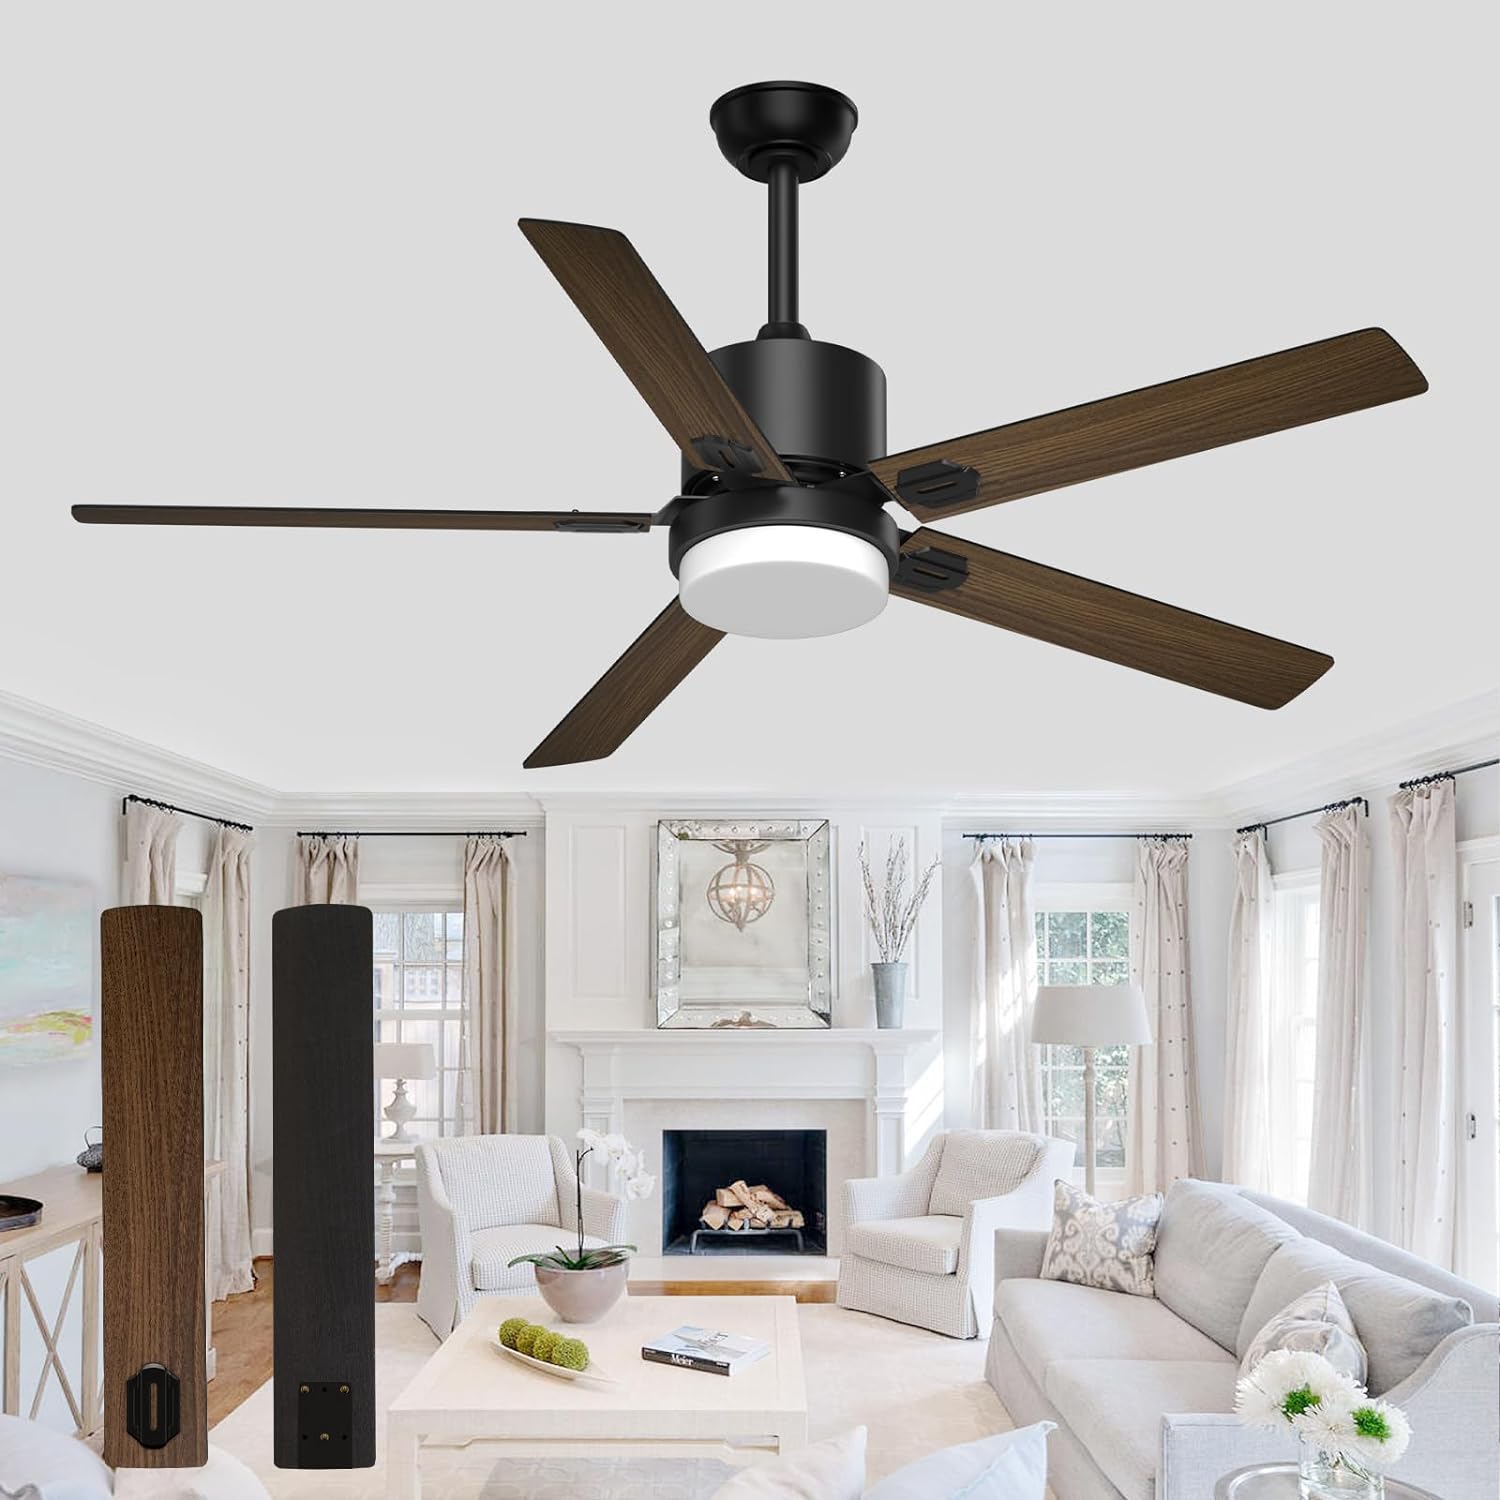 These fans are great and they look good. I recently installed an outdoor covered patio and didnt want to purchase an expensive fan for outdoor use. These fans are great, full of dog hair the price and look out great.